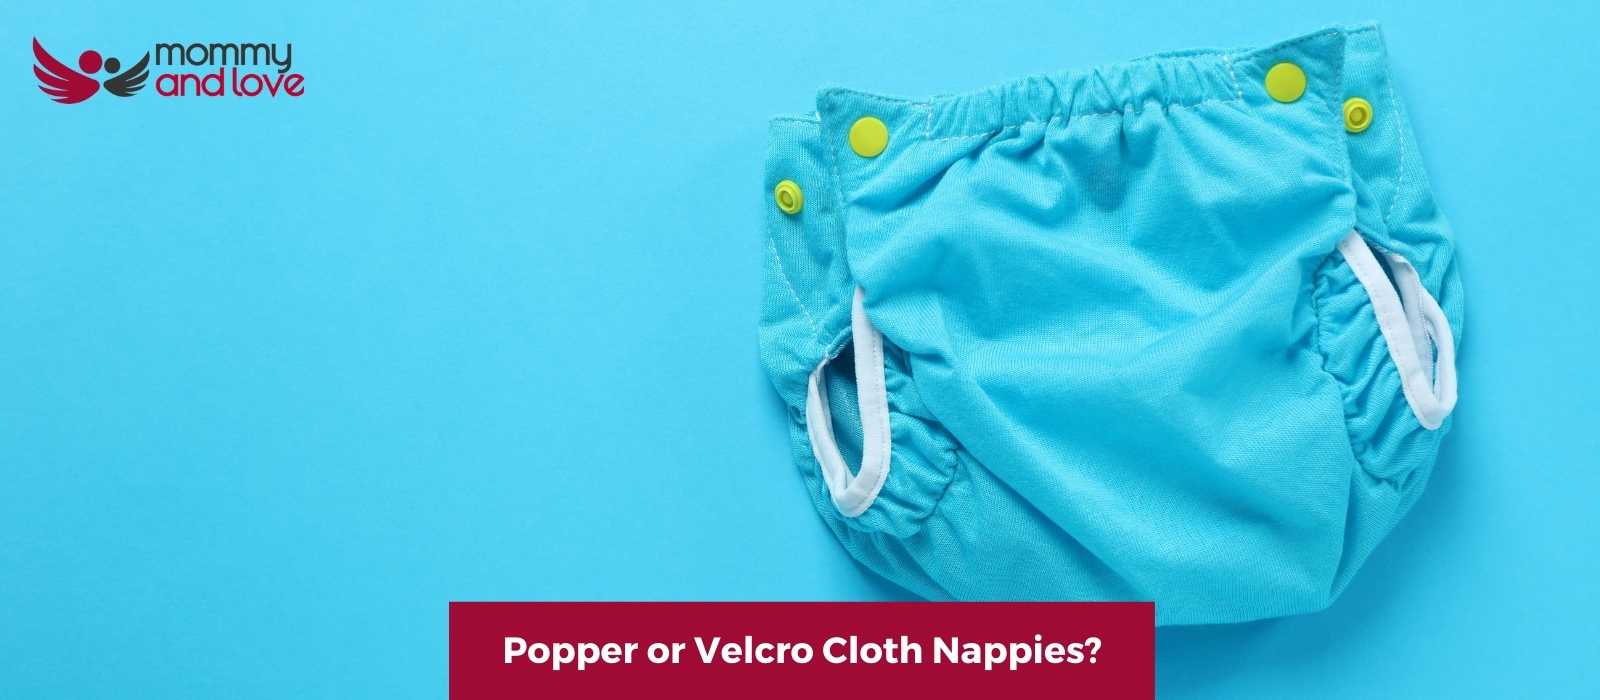 Popper or Velcro Cloth Nappies